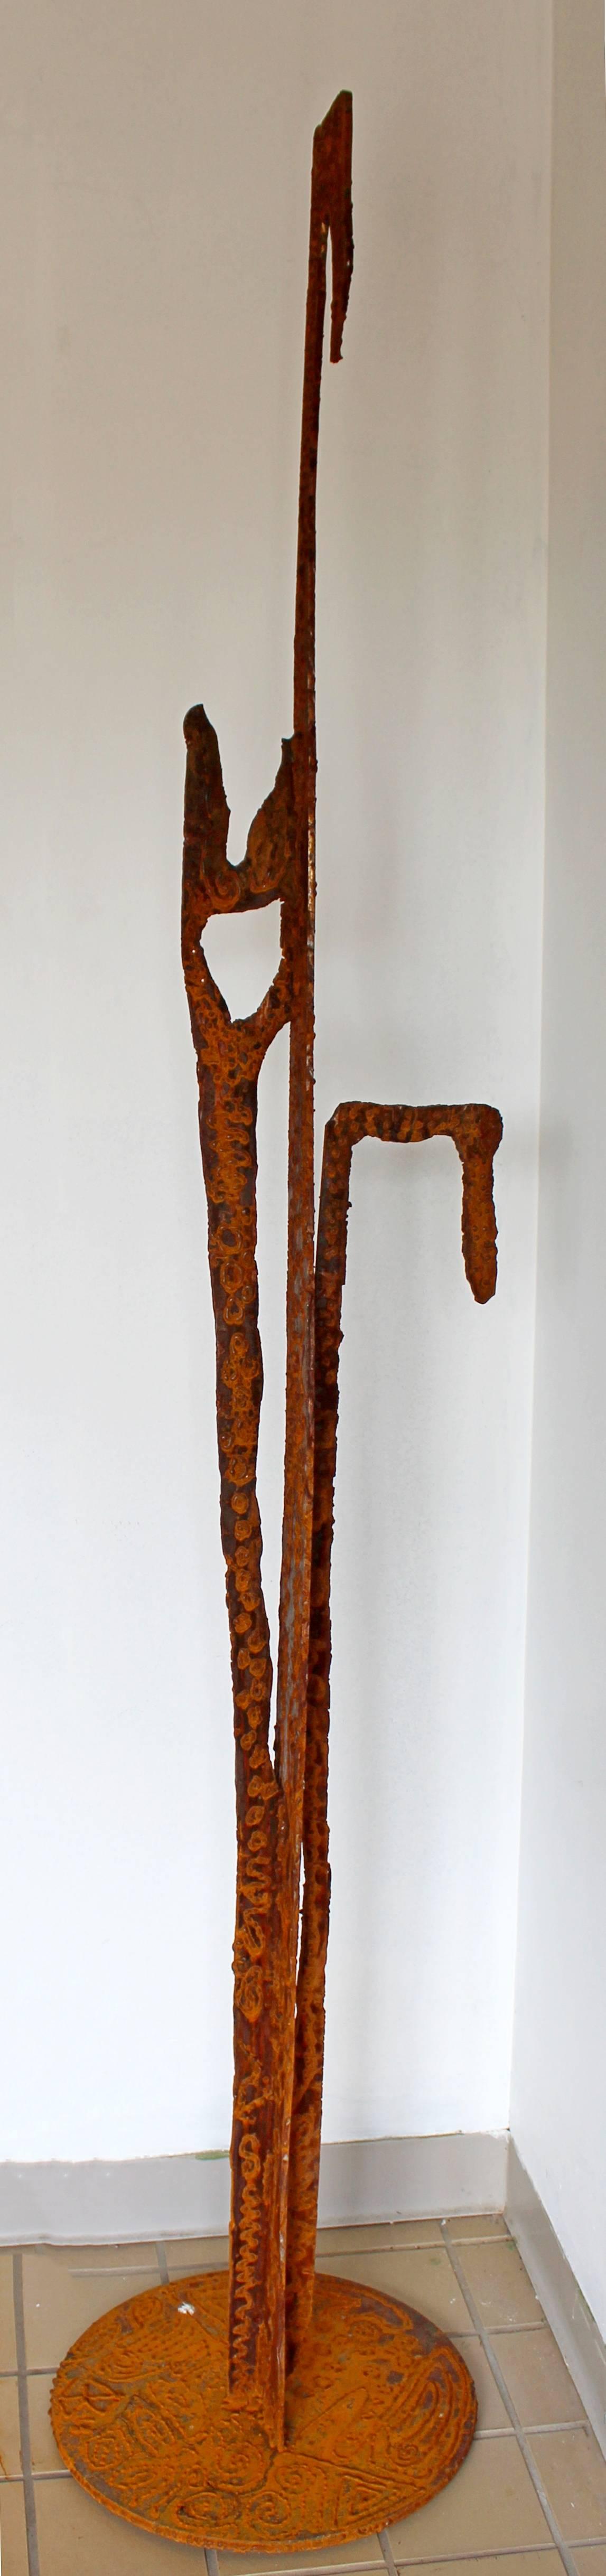 For your consideration is a wonderful, abstract, steel sculpture, with a beautiful patina, fabricated and signed by artist Erich Bolinger. In excellent condition. The dimensions are 16.5